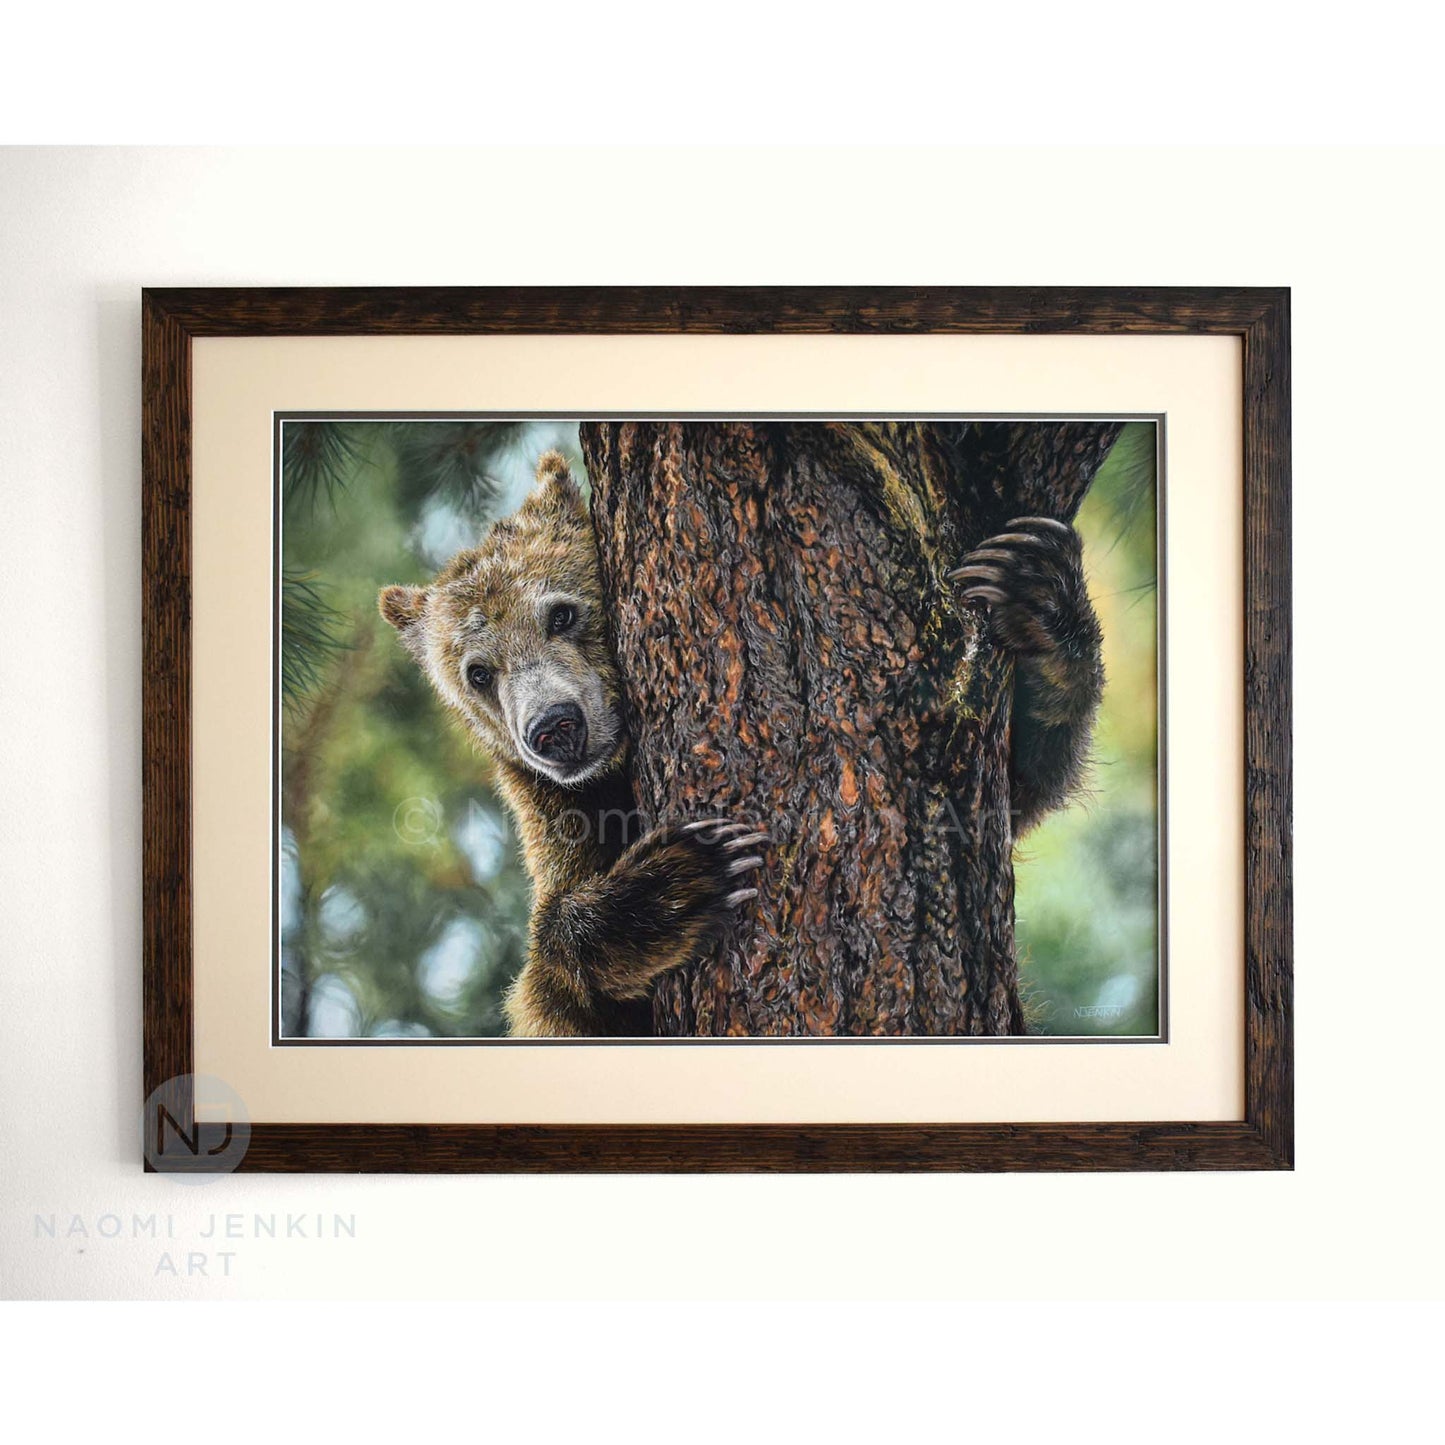 Framed grizzly bear original painting by Naomi Jenkin Art